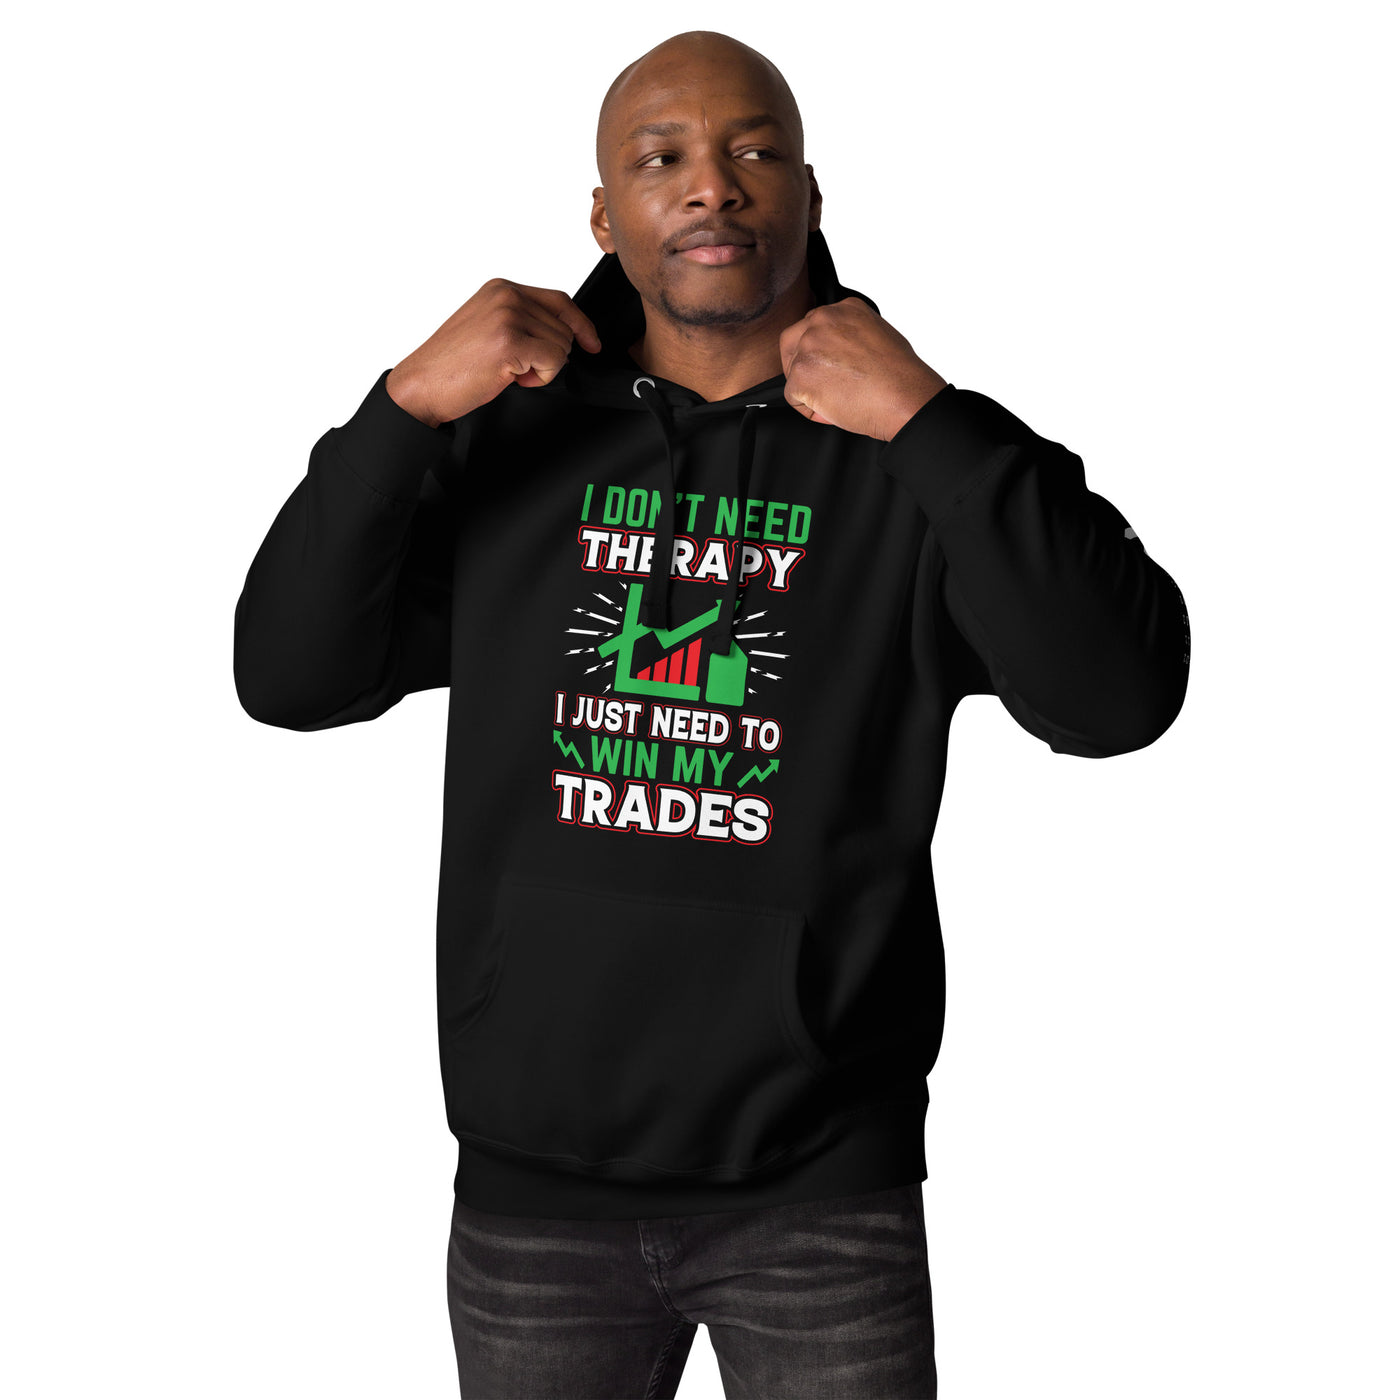 I don't Need therapy, I just Need to Win my Trades V2 - Unisex Hoodie